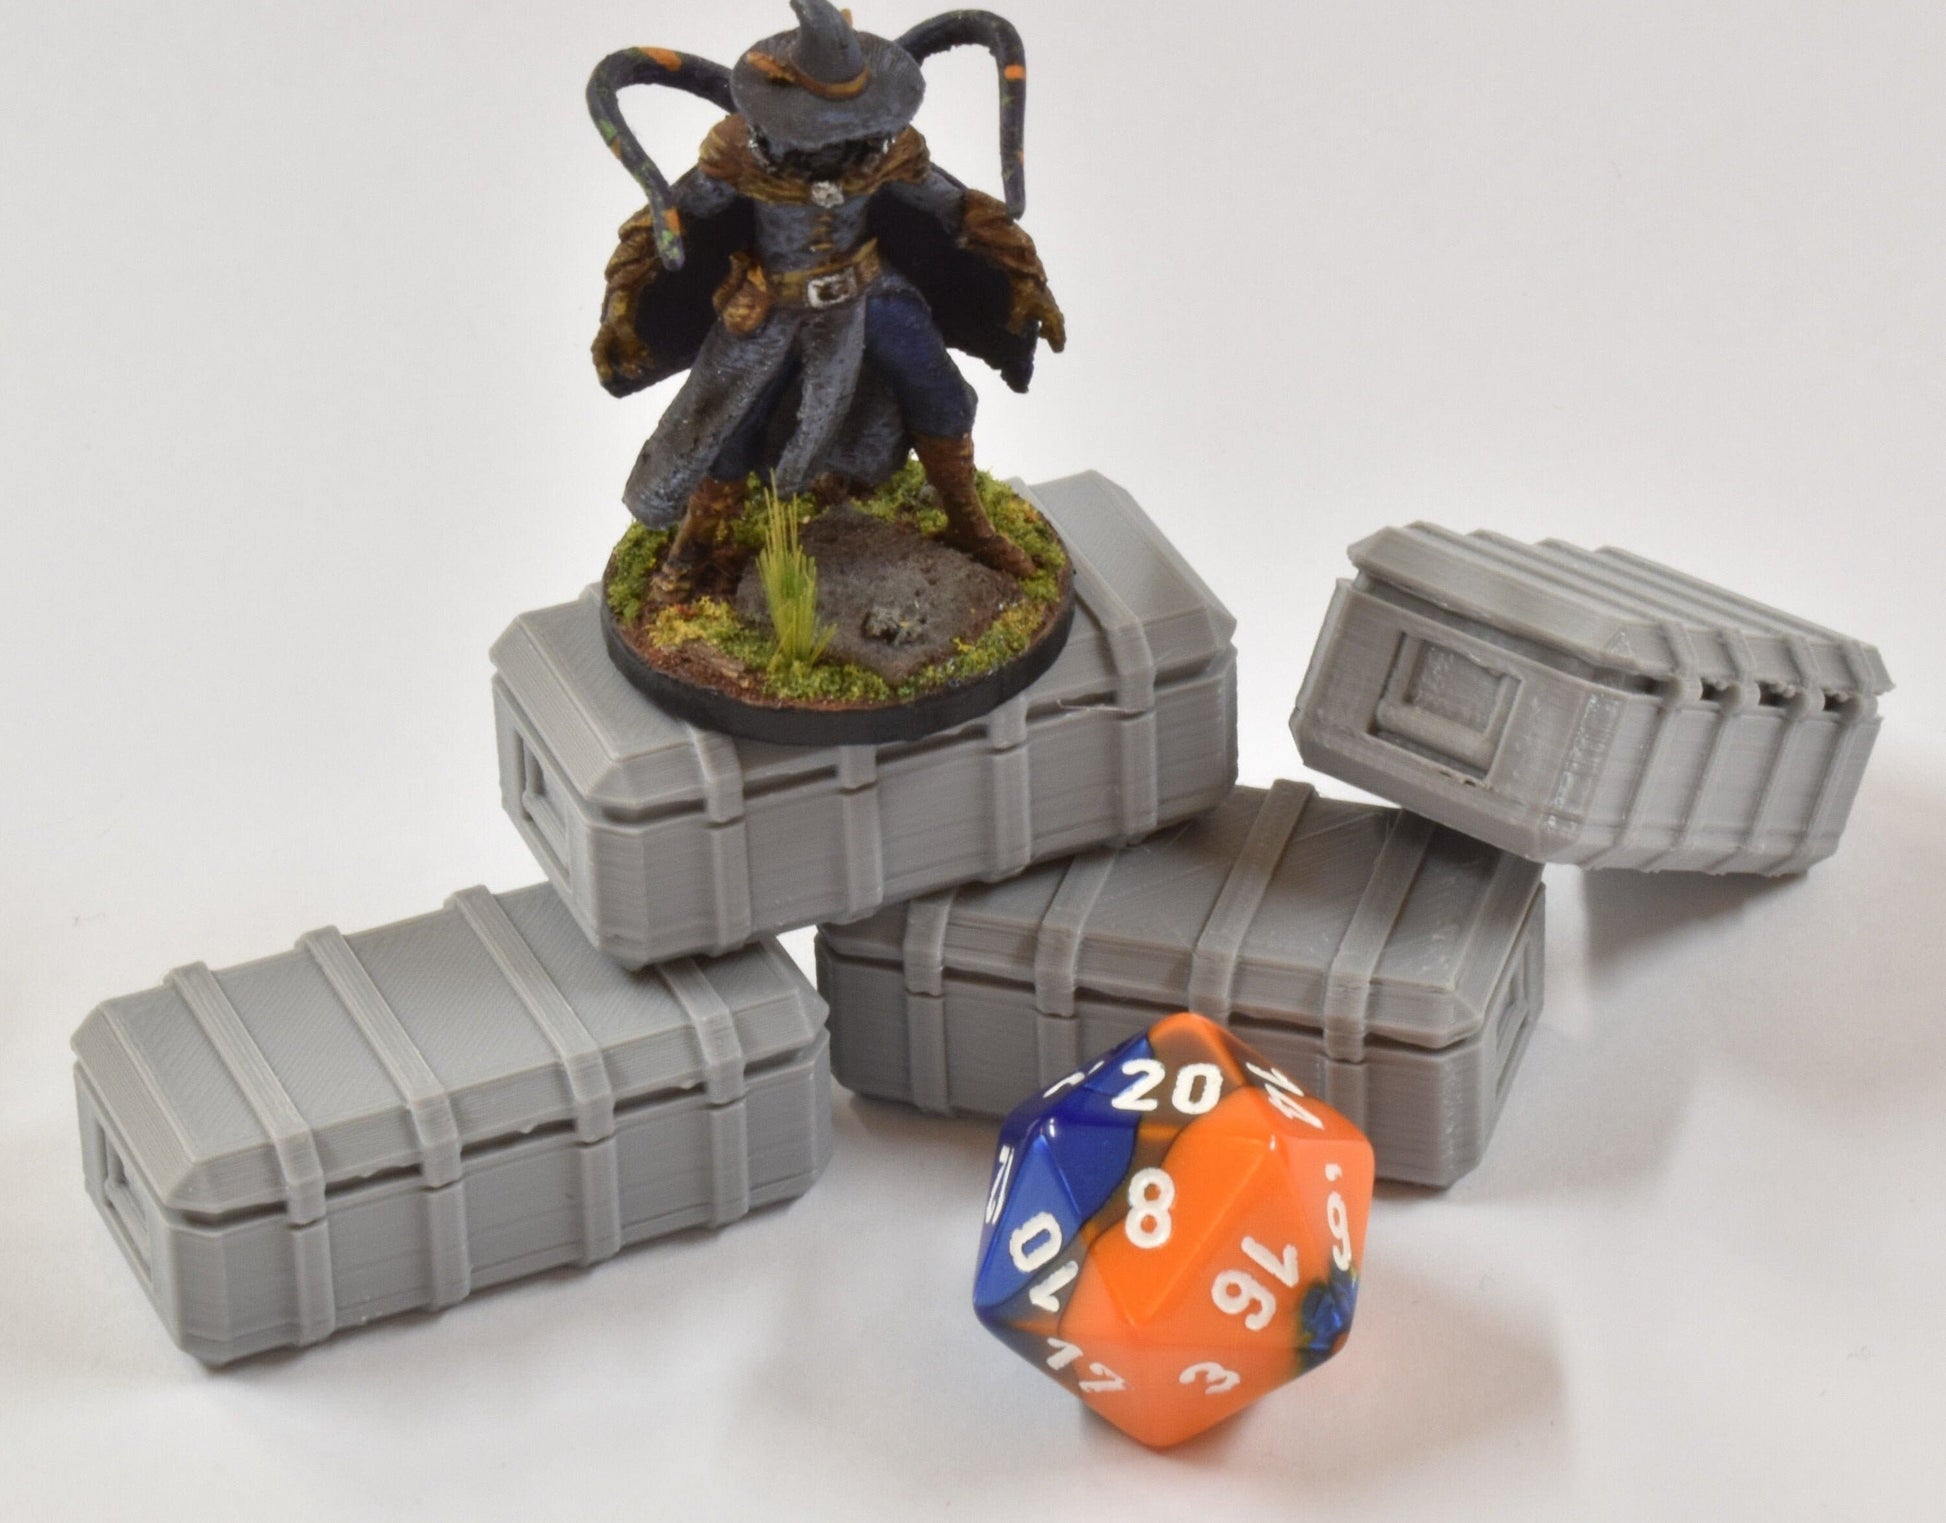 Storage Crates - Sci-fi/Modern - 4pk - Large | RPG | 3D printed | 28mm | 32mm | Terrain Scatter - CreatorpultGames - Role Playing Miniatures